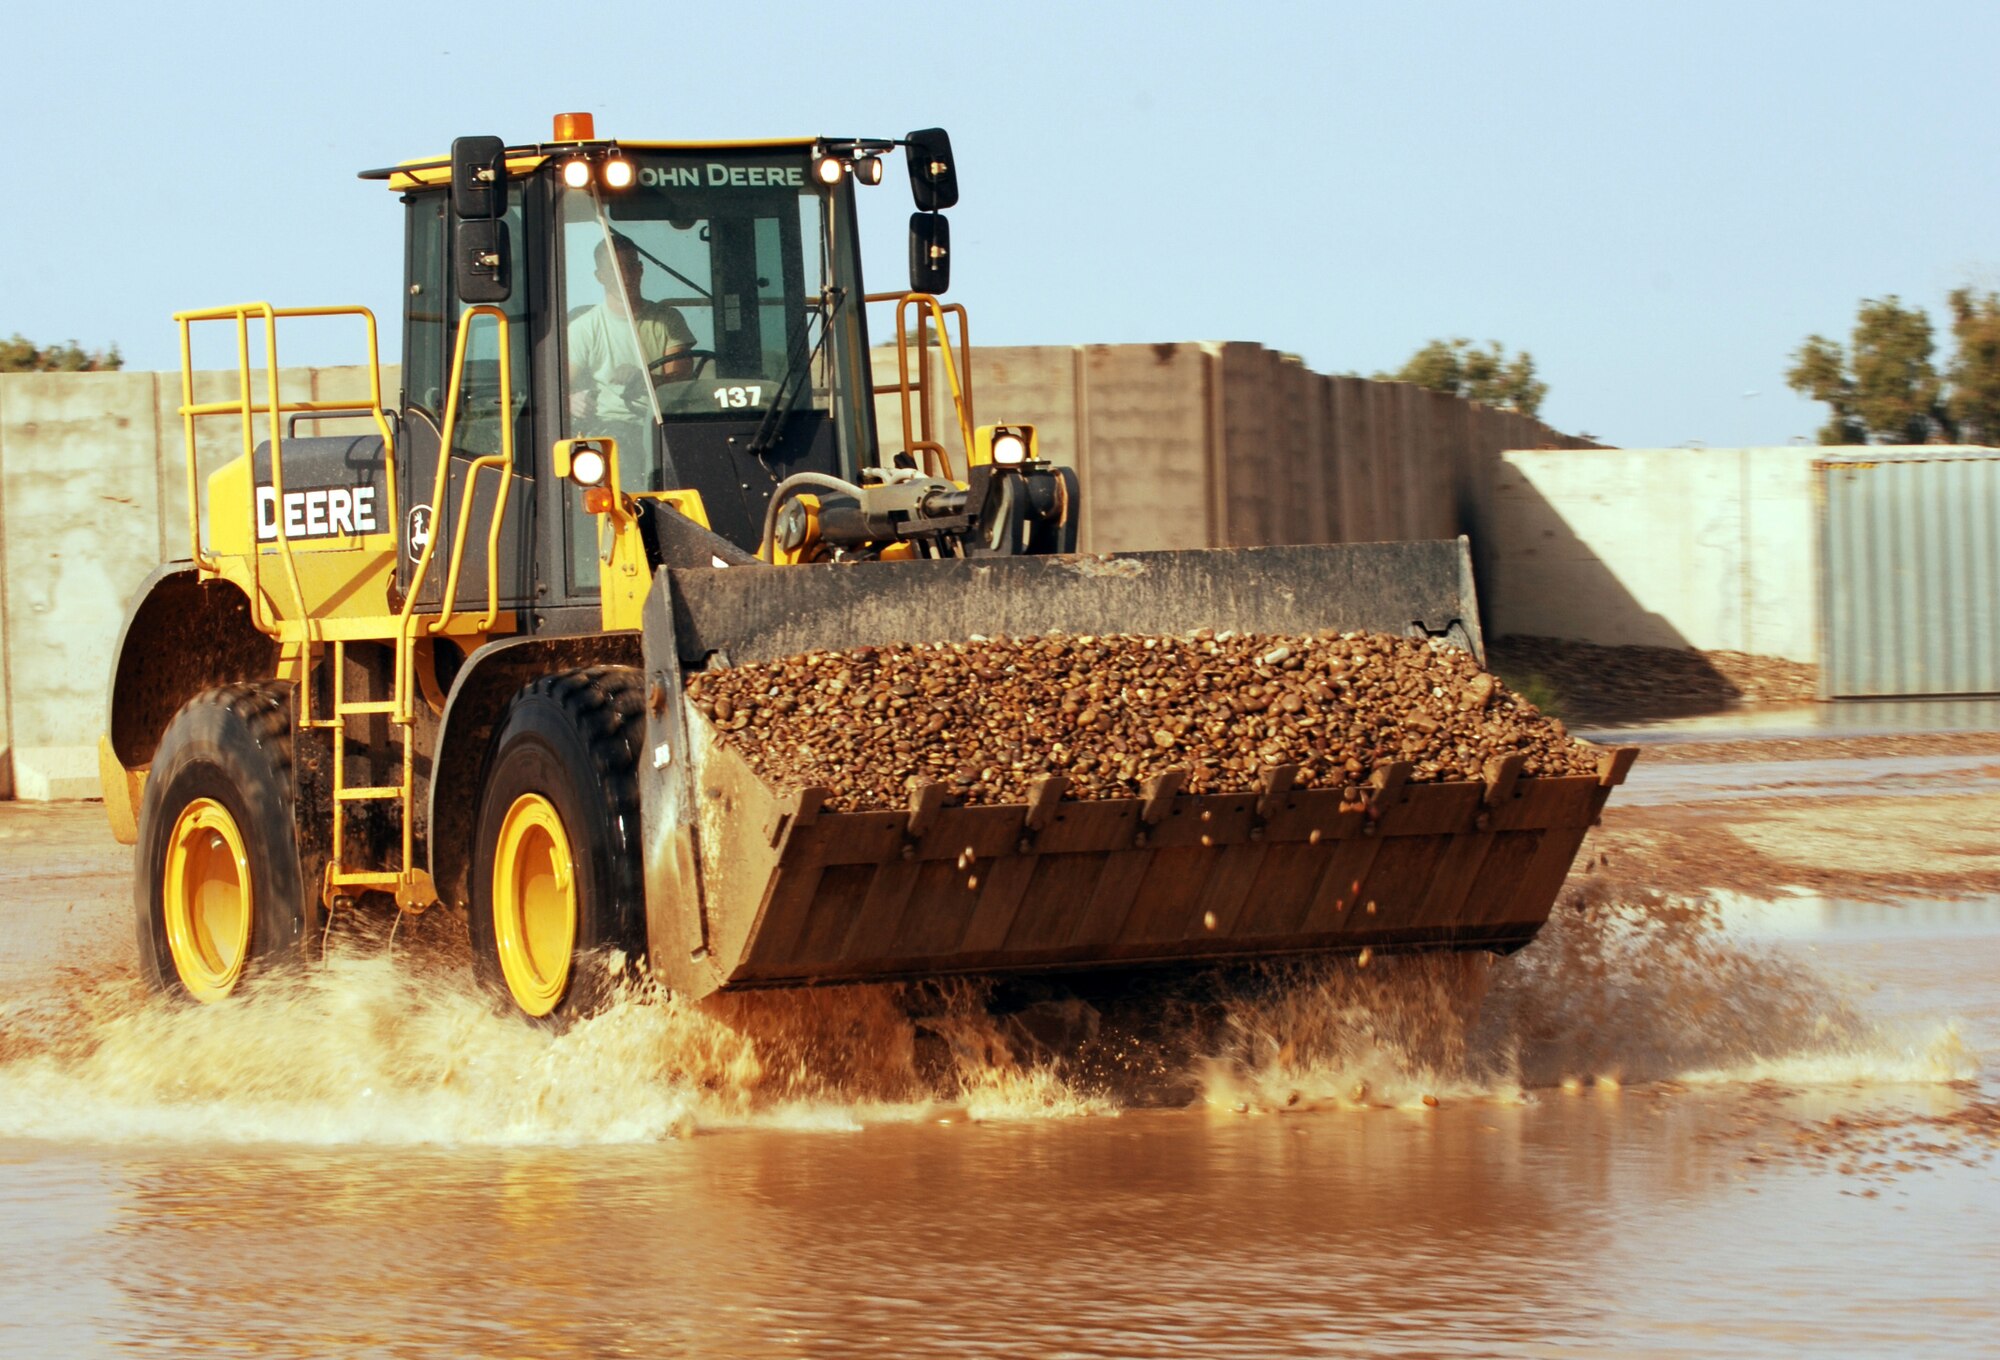 A front end loader plows through a flooded area of Joint Base Balad, Iraq, with a load of rock to build up low areas Oct. 25. Because rain is infrequent in Iraq, when it does rain, the hardened ground soaks up little water. (U.S. Air Force photo/Tech. Sgt. Erik Gudmundson)